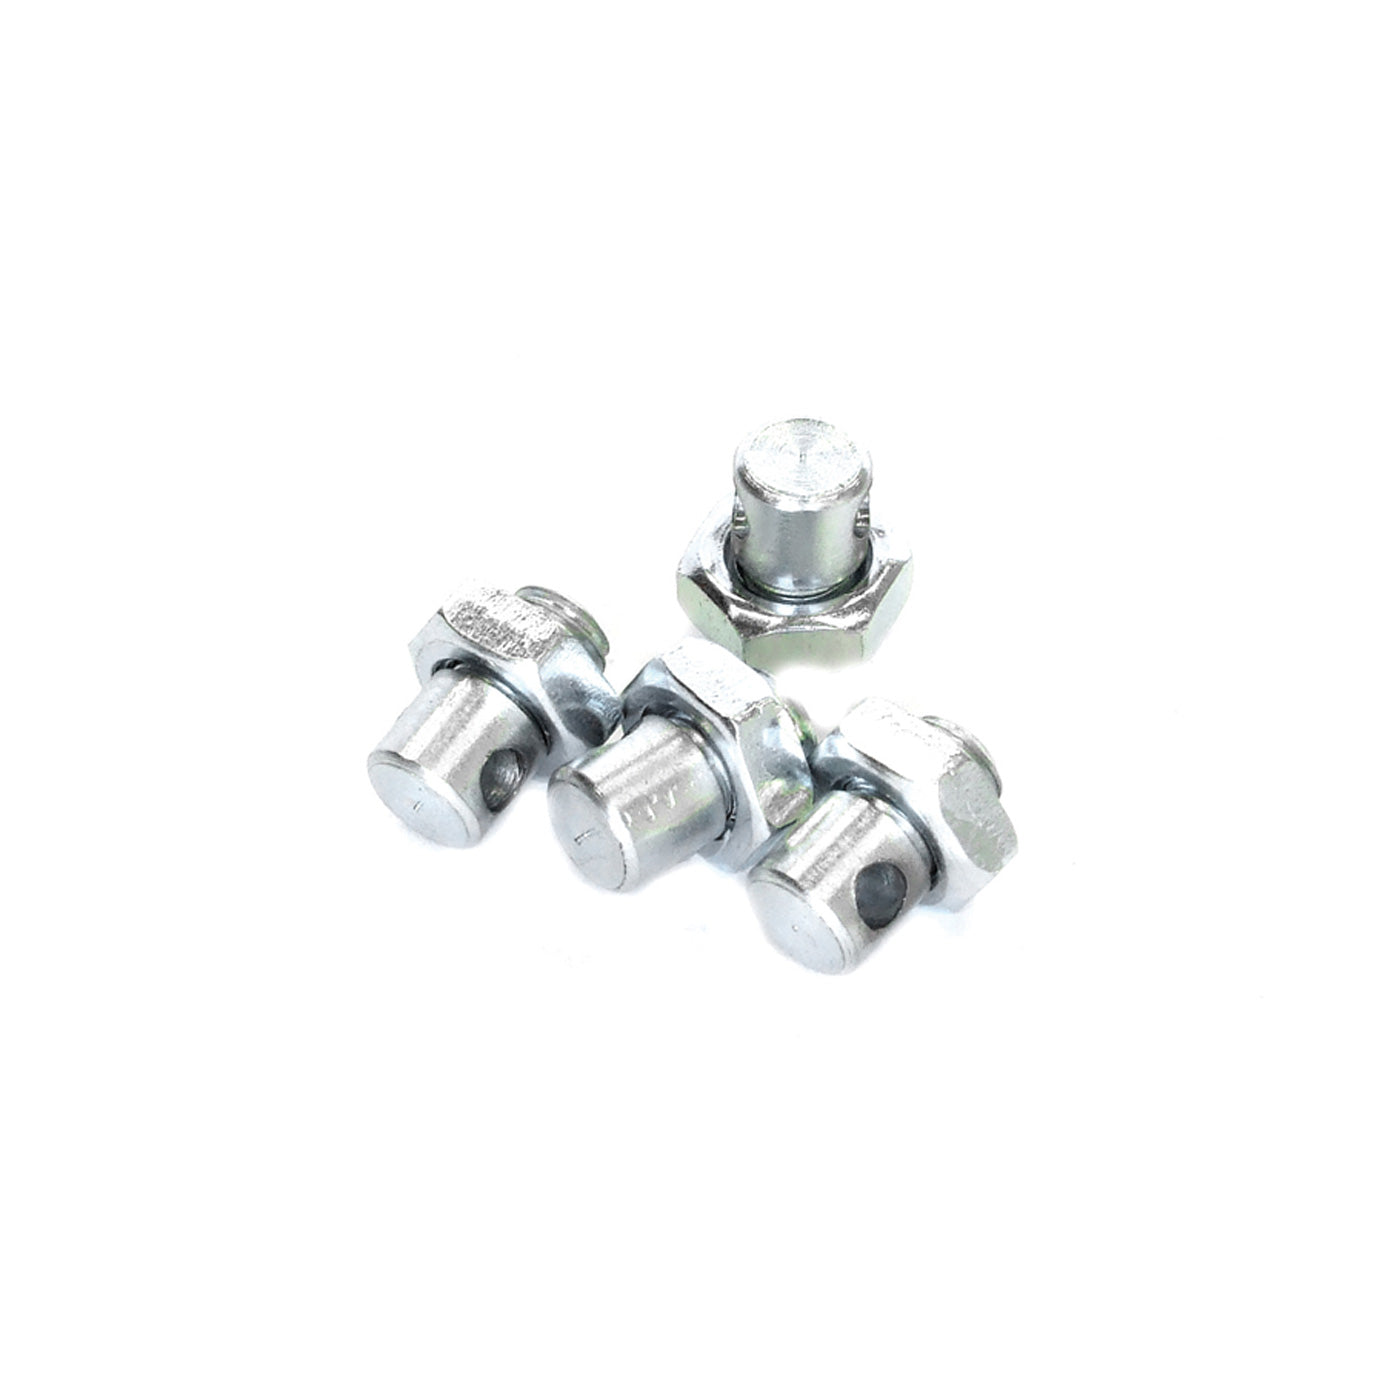 View Mud guard nuts information